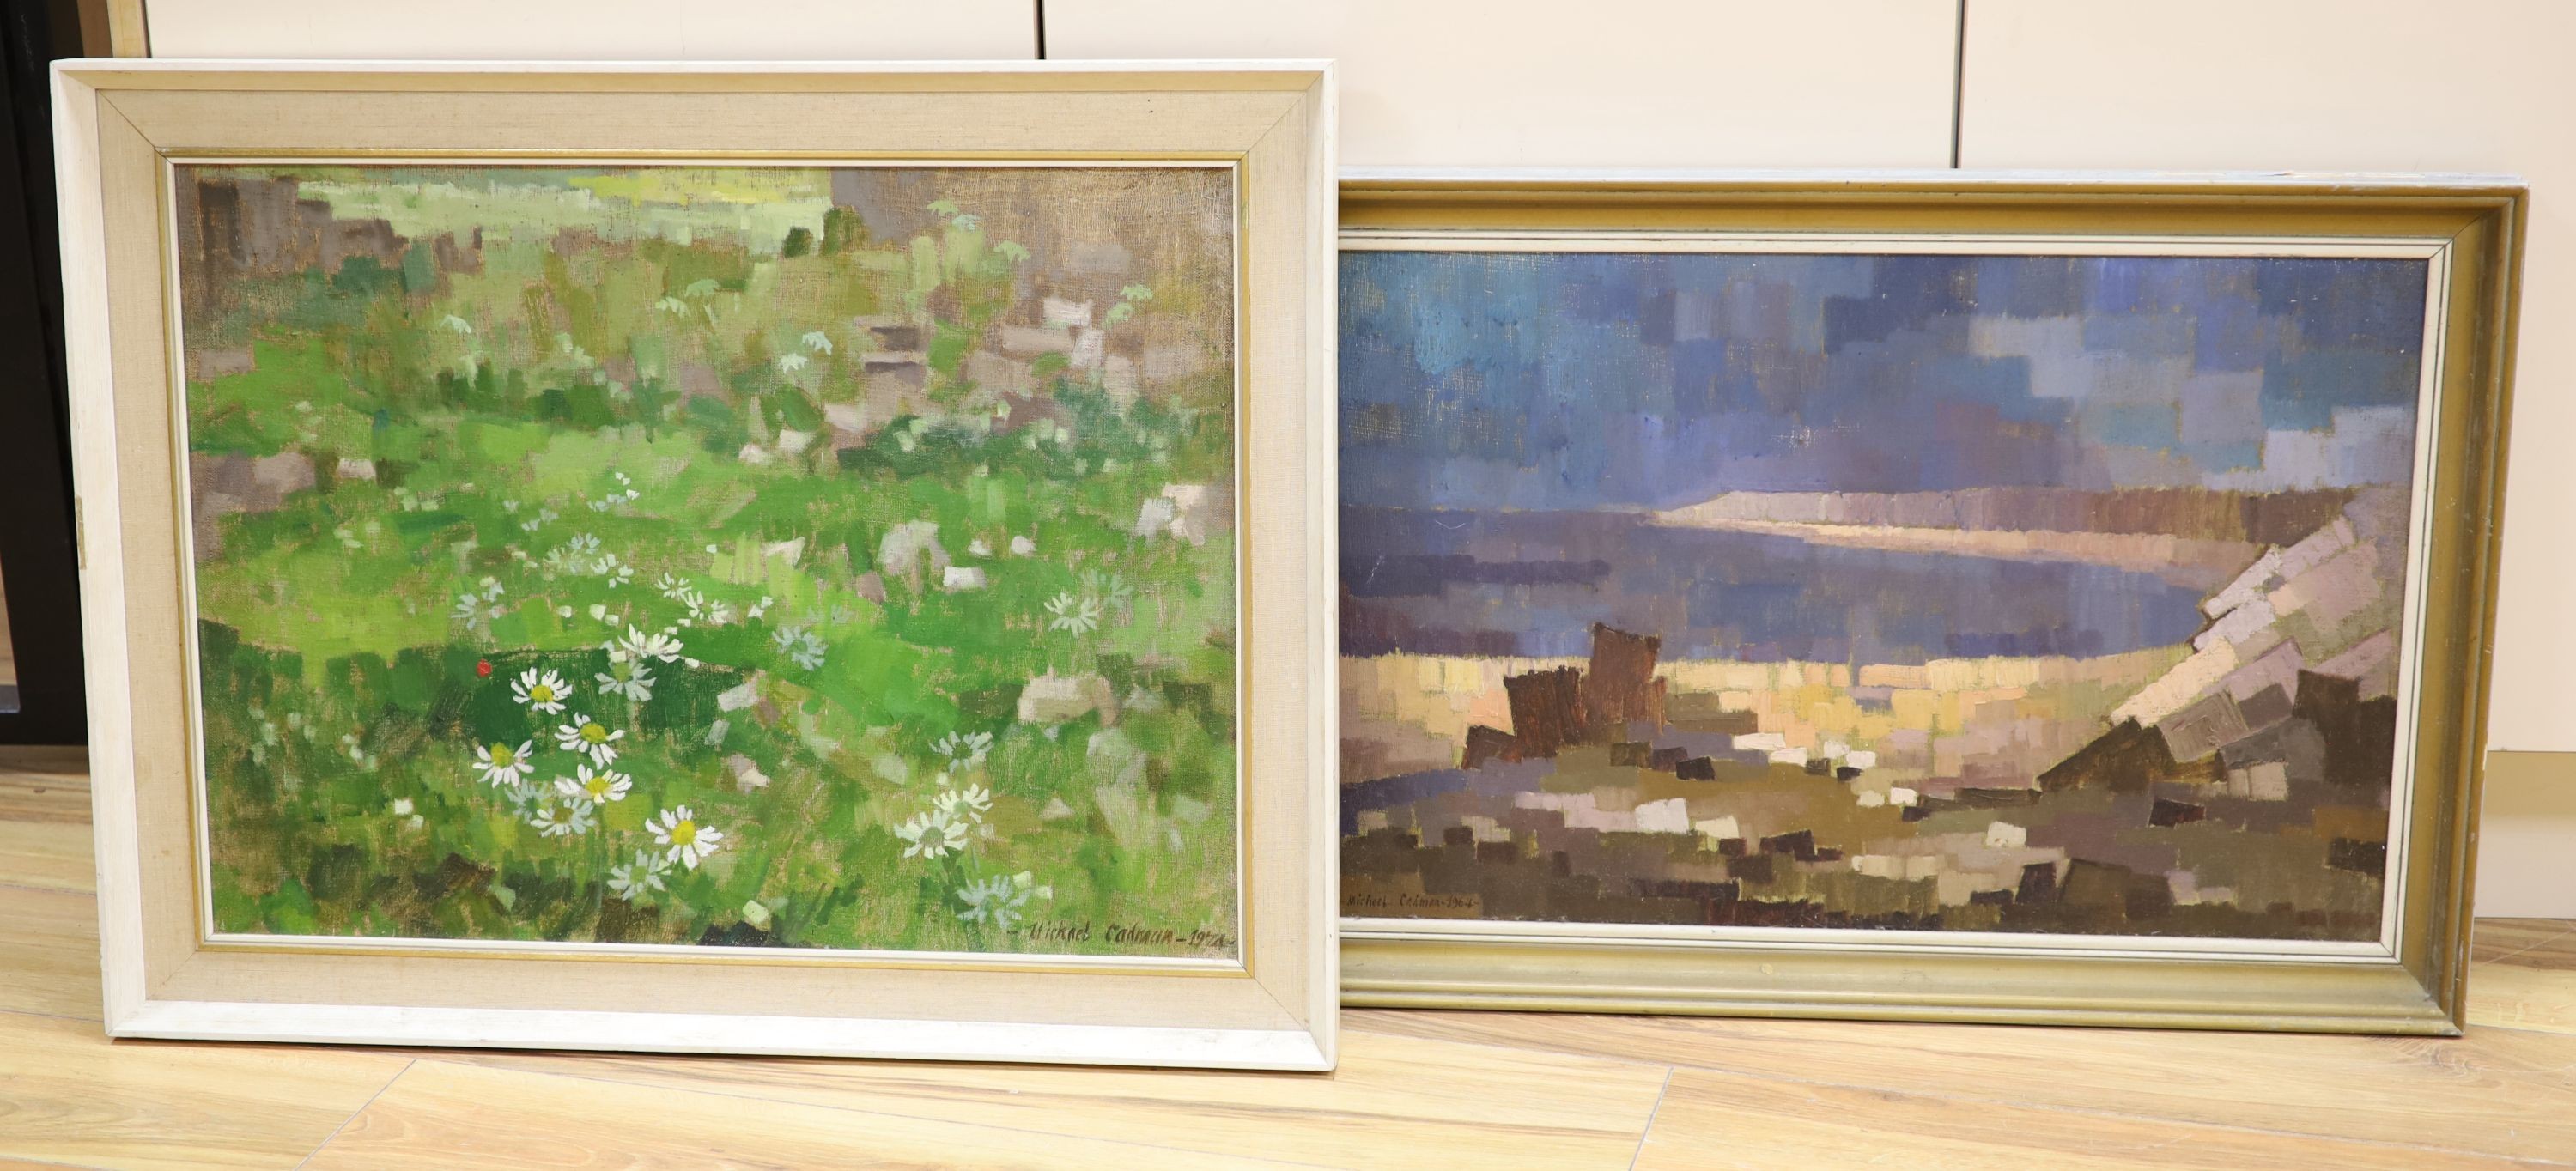 Michael Cadman (1920-2010), two oils on board, Abstract landscape 1964 and Farmyard, France, both signed, 40 x 60cm and 44 x 60cm